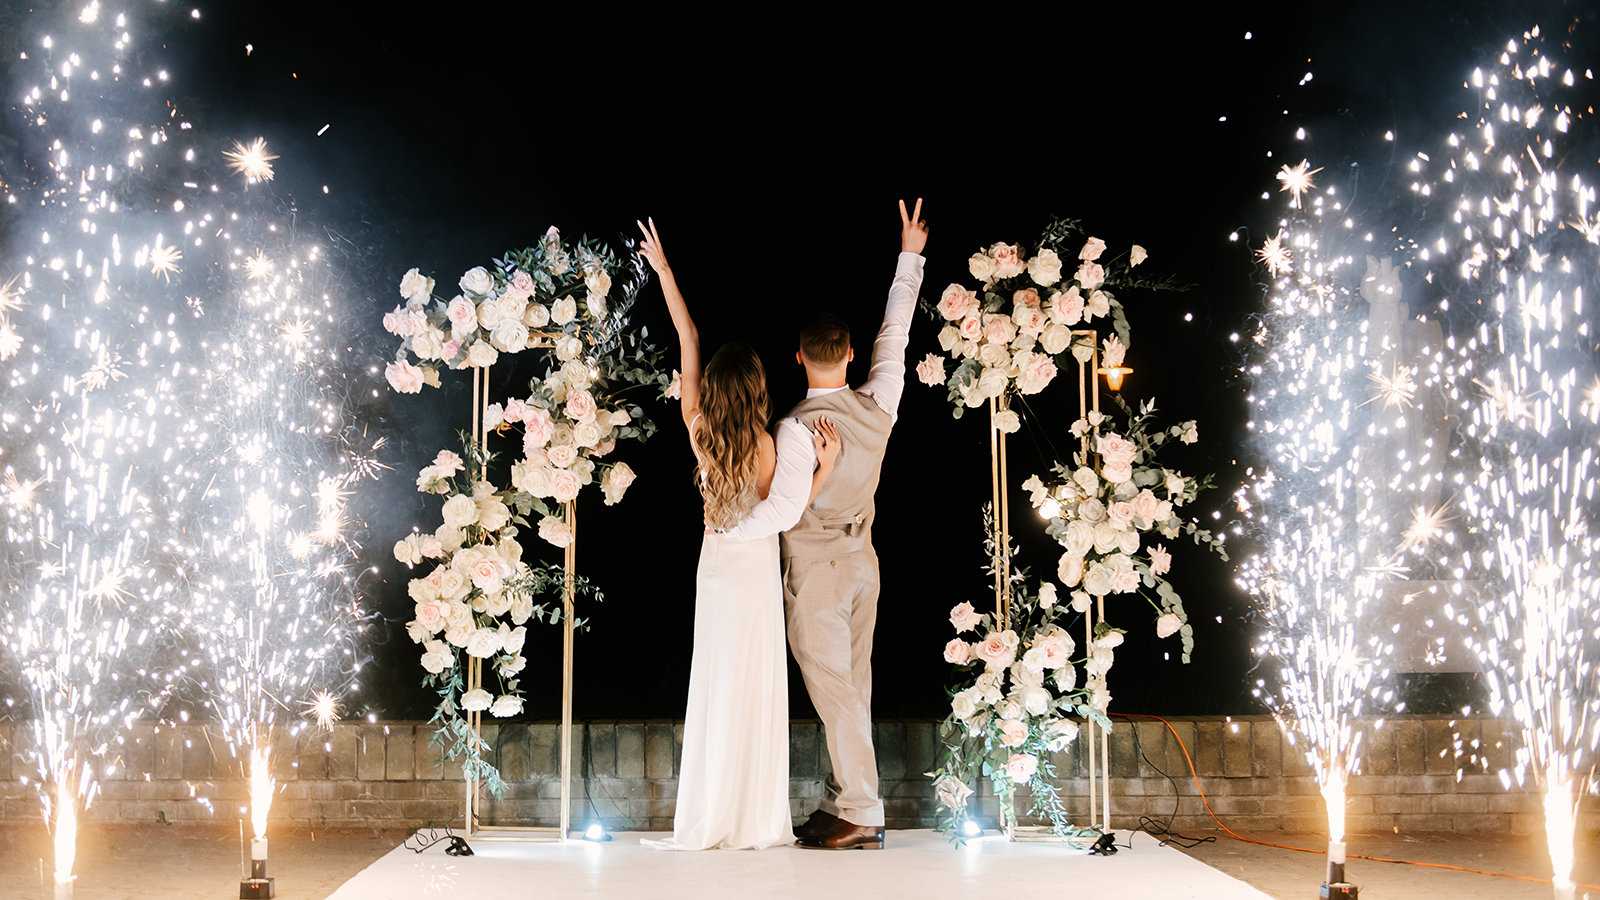 Young bride and groom stand near the wedding arch at night with lights, smoke and fireworks, silhouettes of the newlyweds